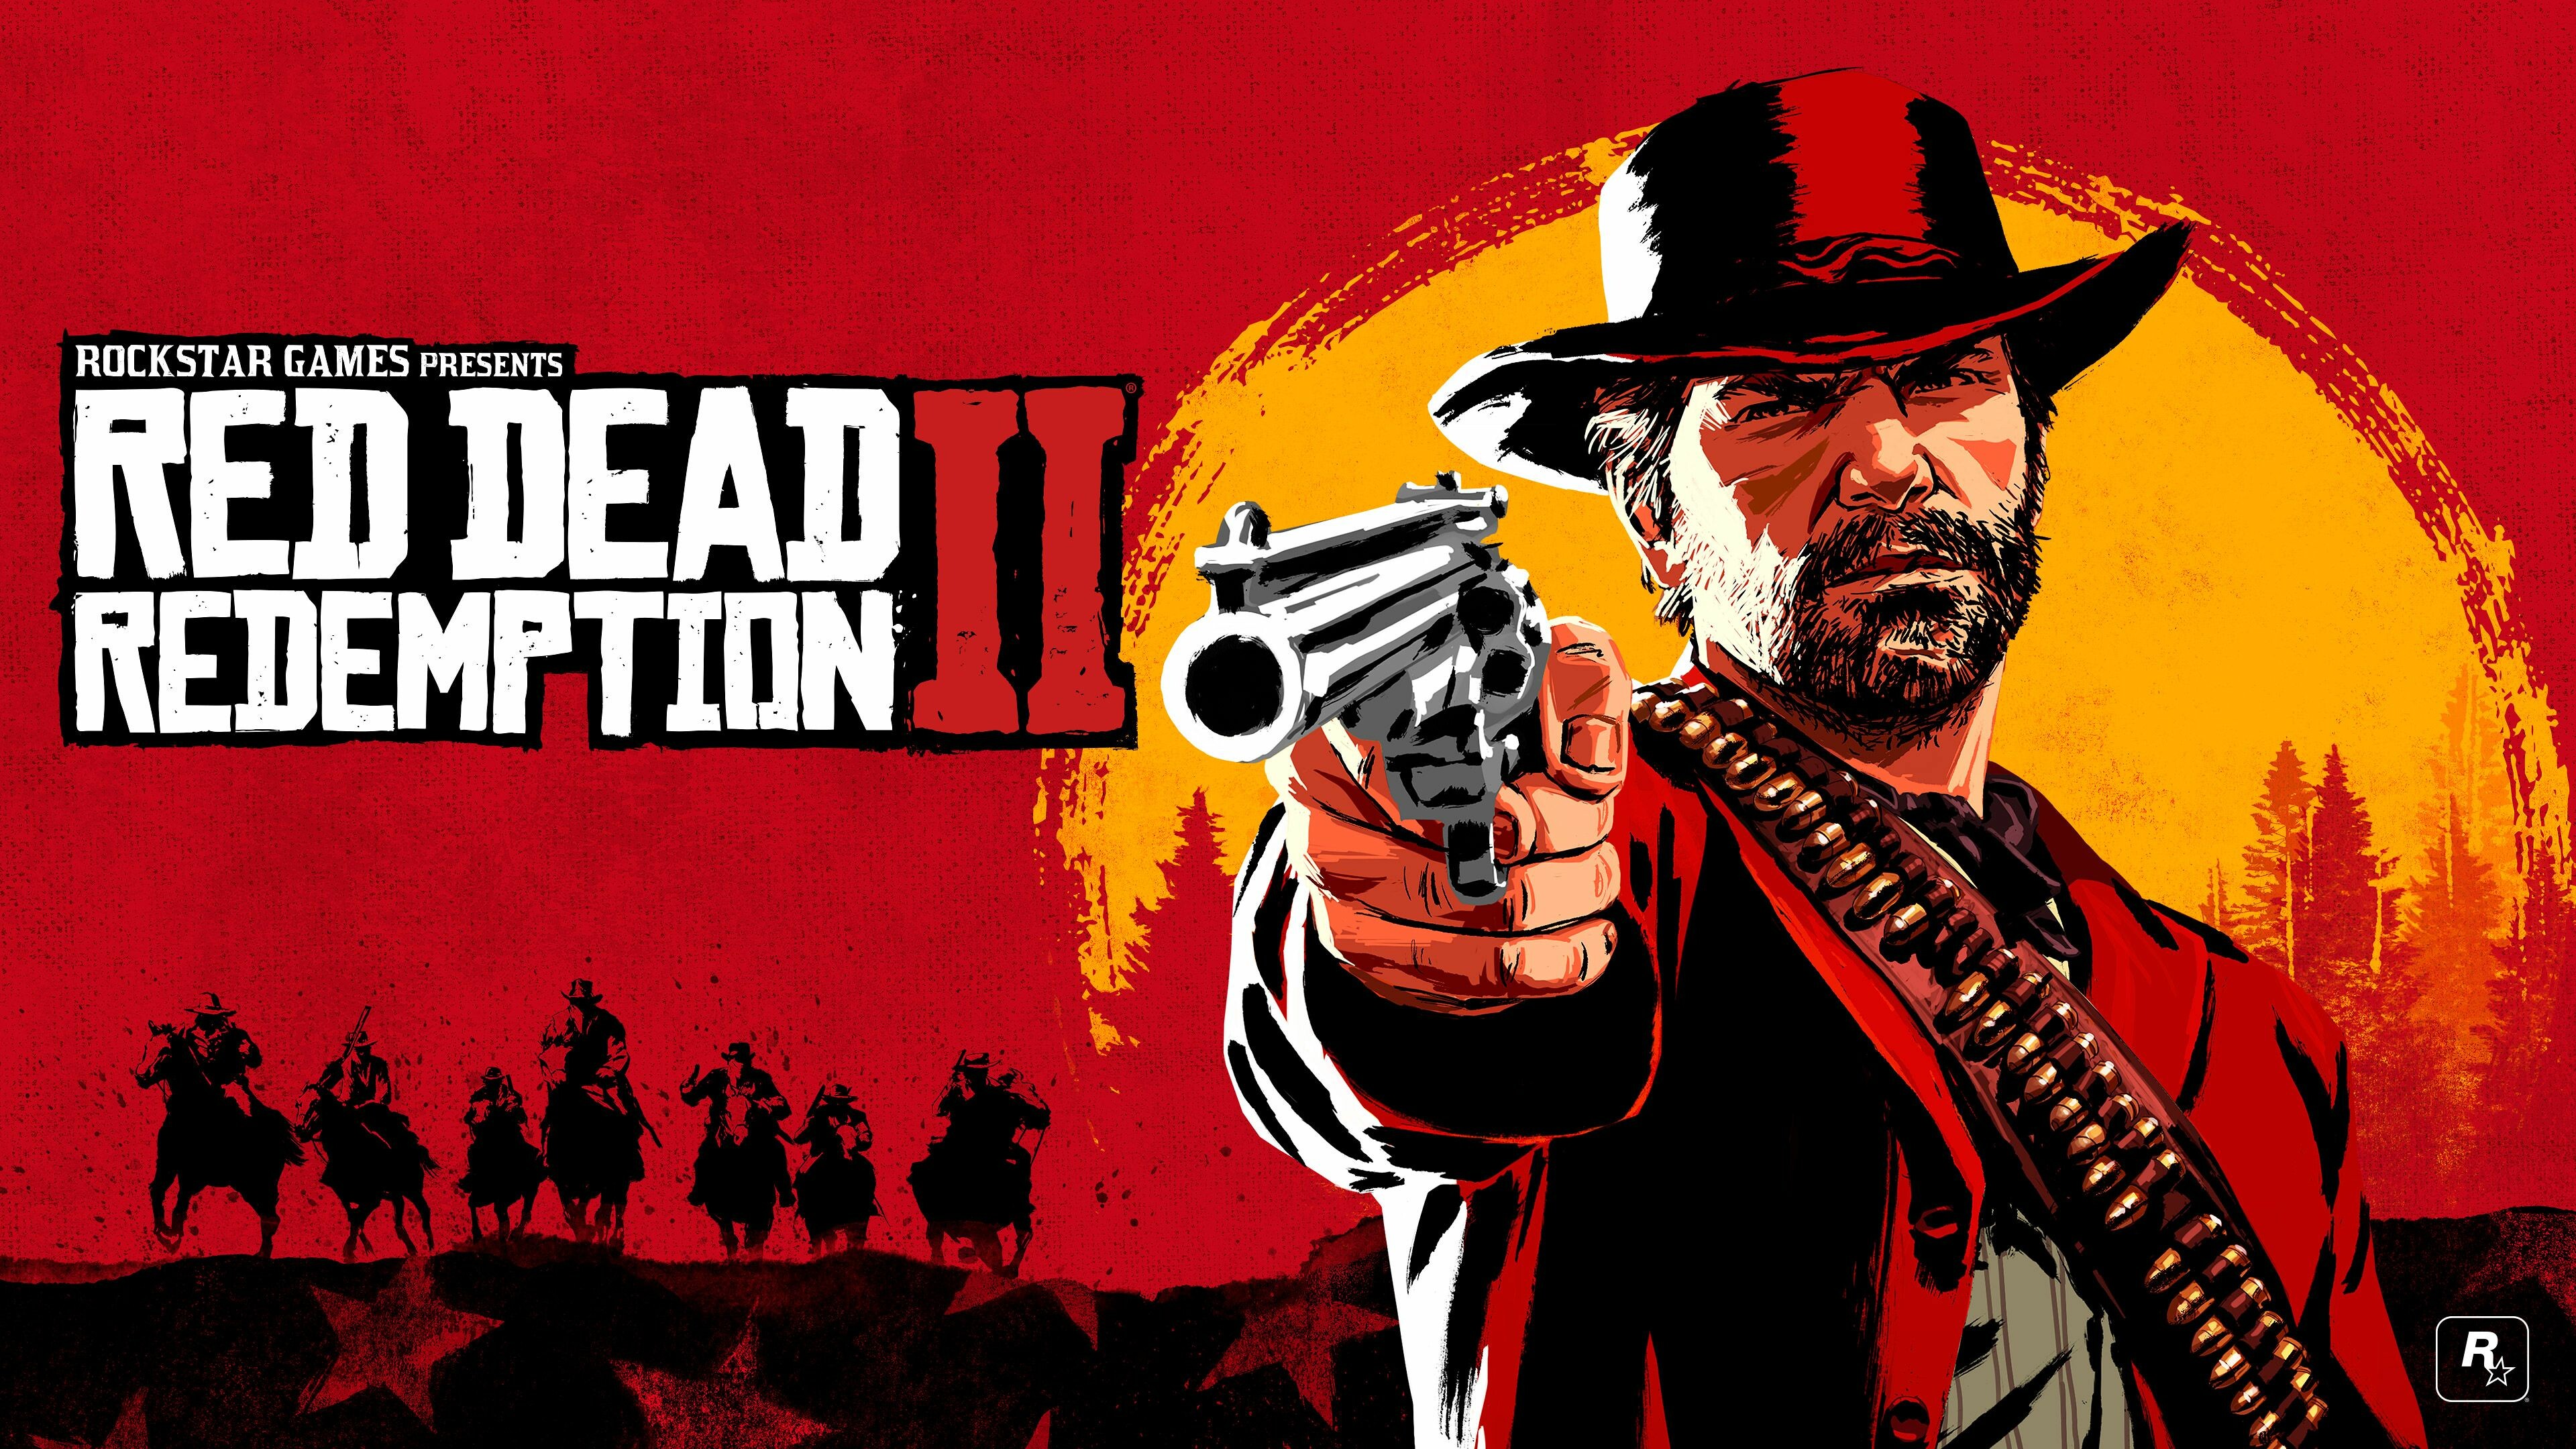 Red Dead Redemption: A 2018 action-adventure game developed and published by Rockstar Games. 3840x2160 4K Wallpaper.